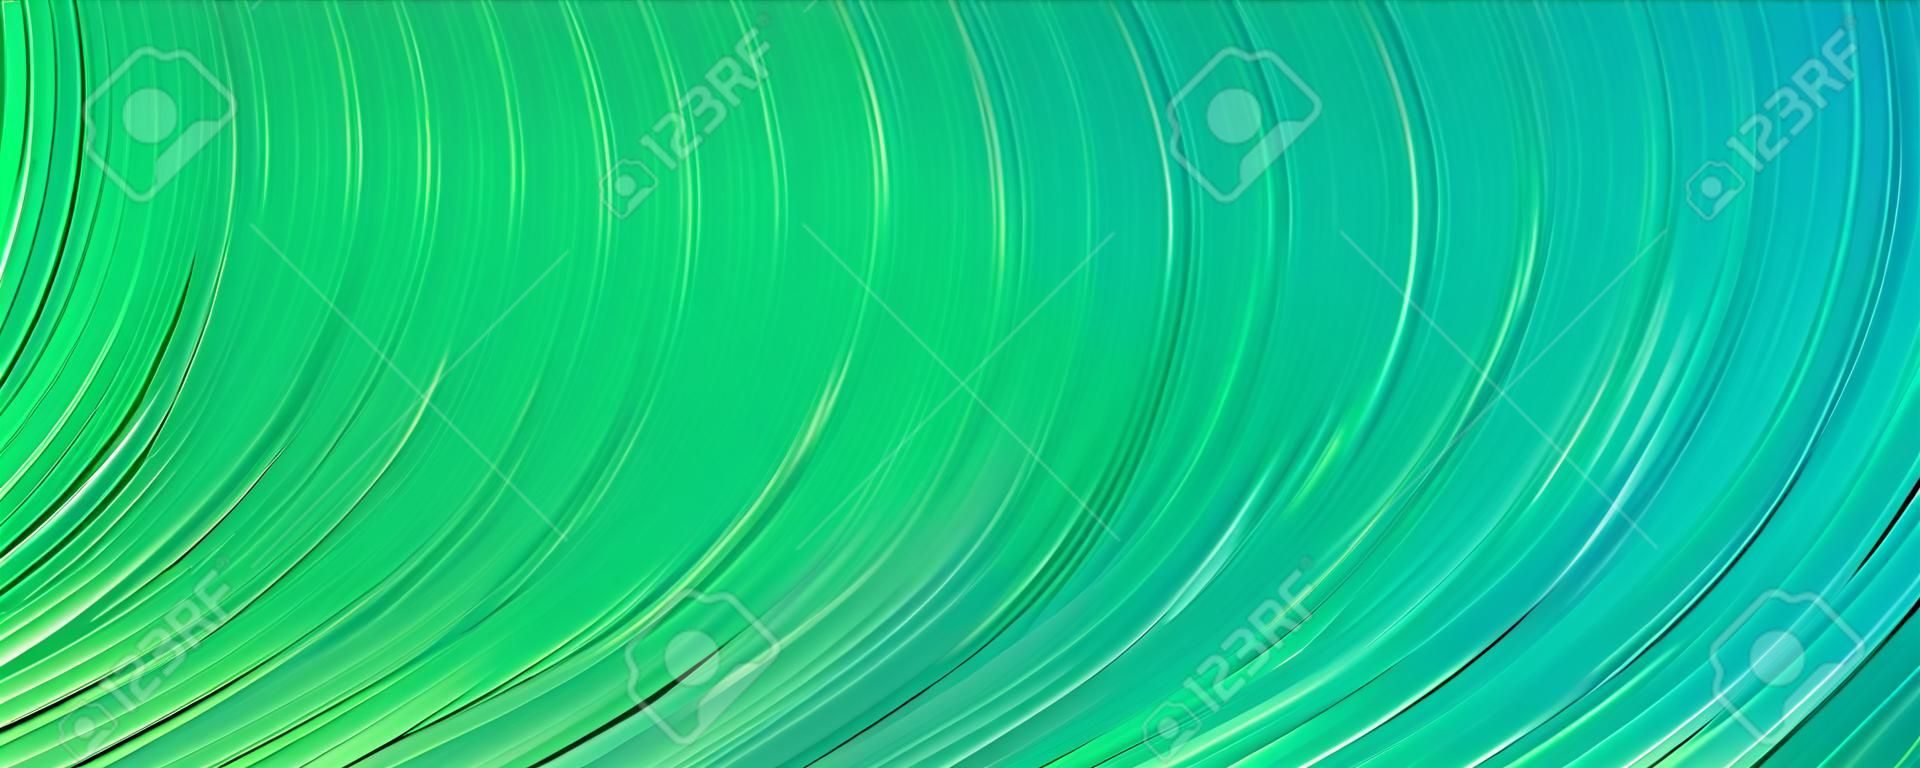 Modern green gradient backgrounds with lines. header banner. Bright geometric abstract presentation backdrops. vector illustration